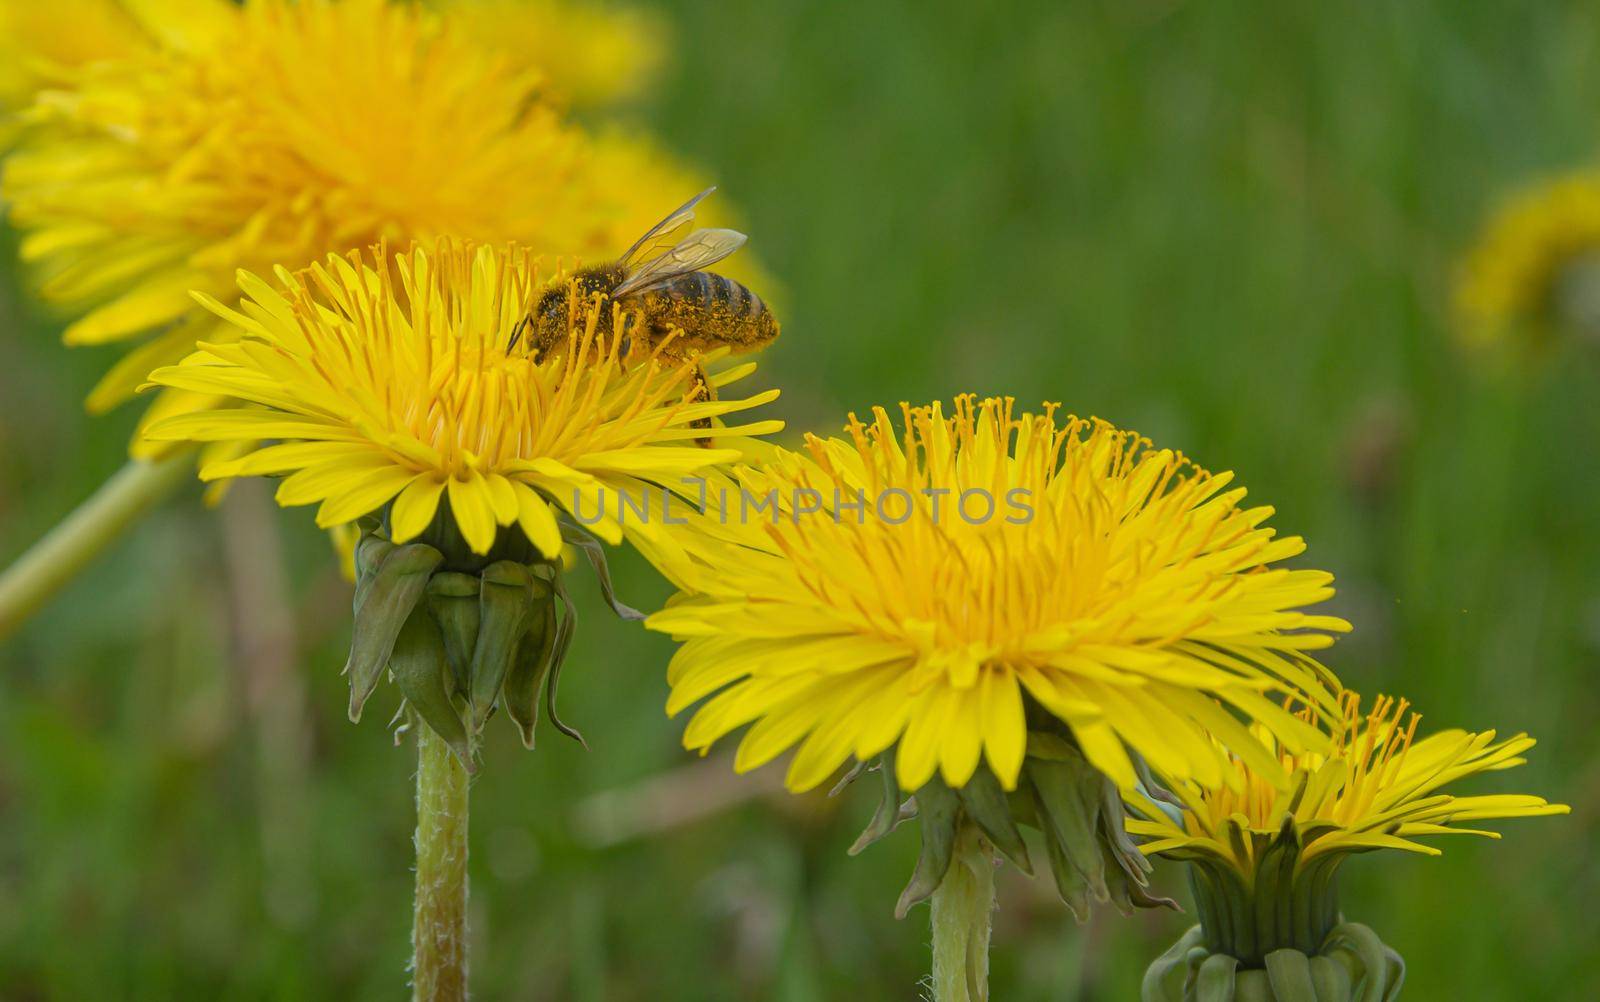 Bee on a yellow dandelion flower on a blurred background with bokeh elements by Grommik